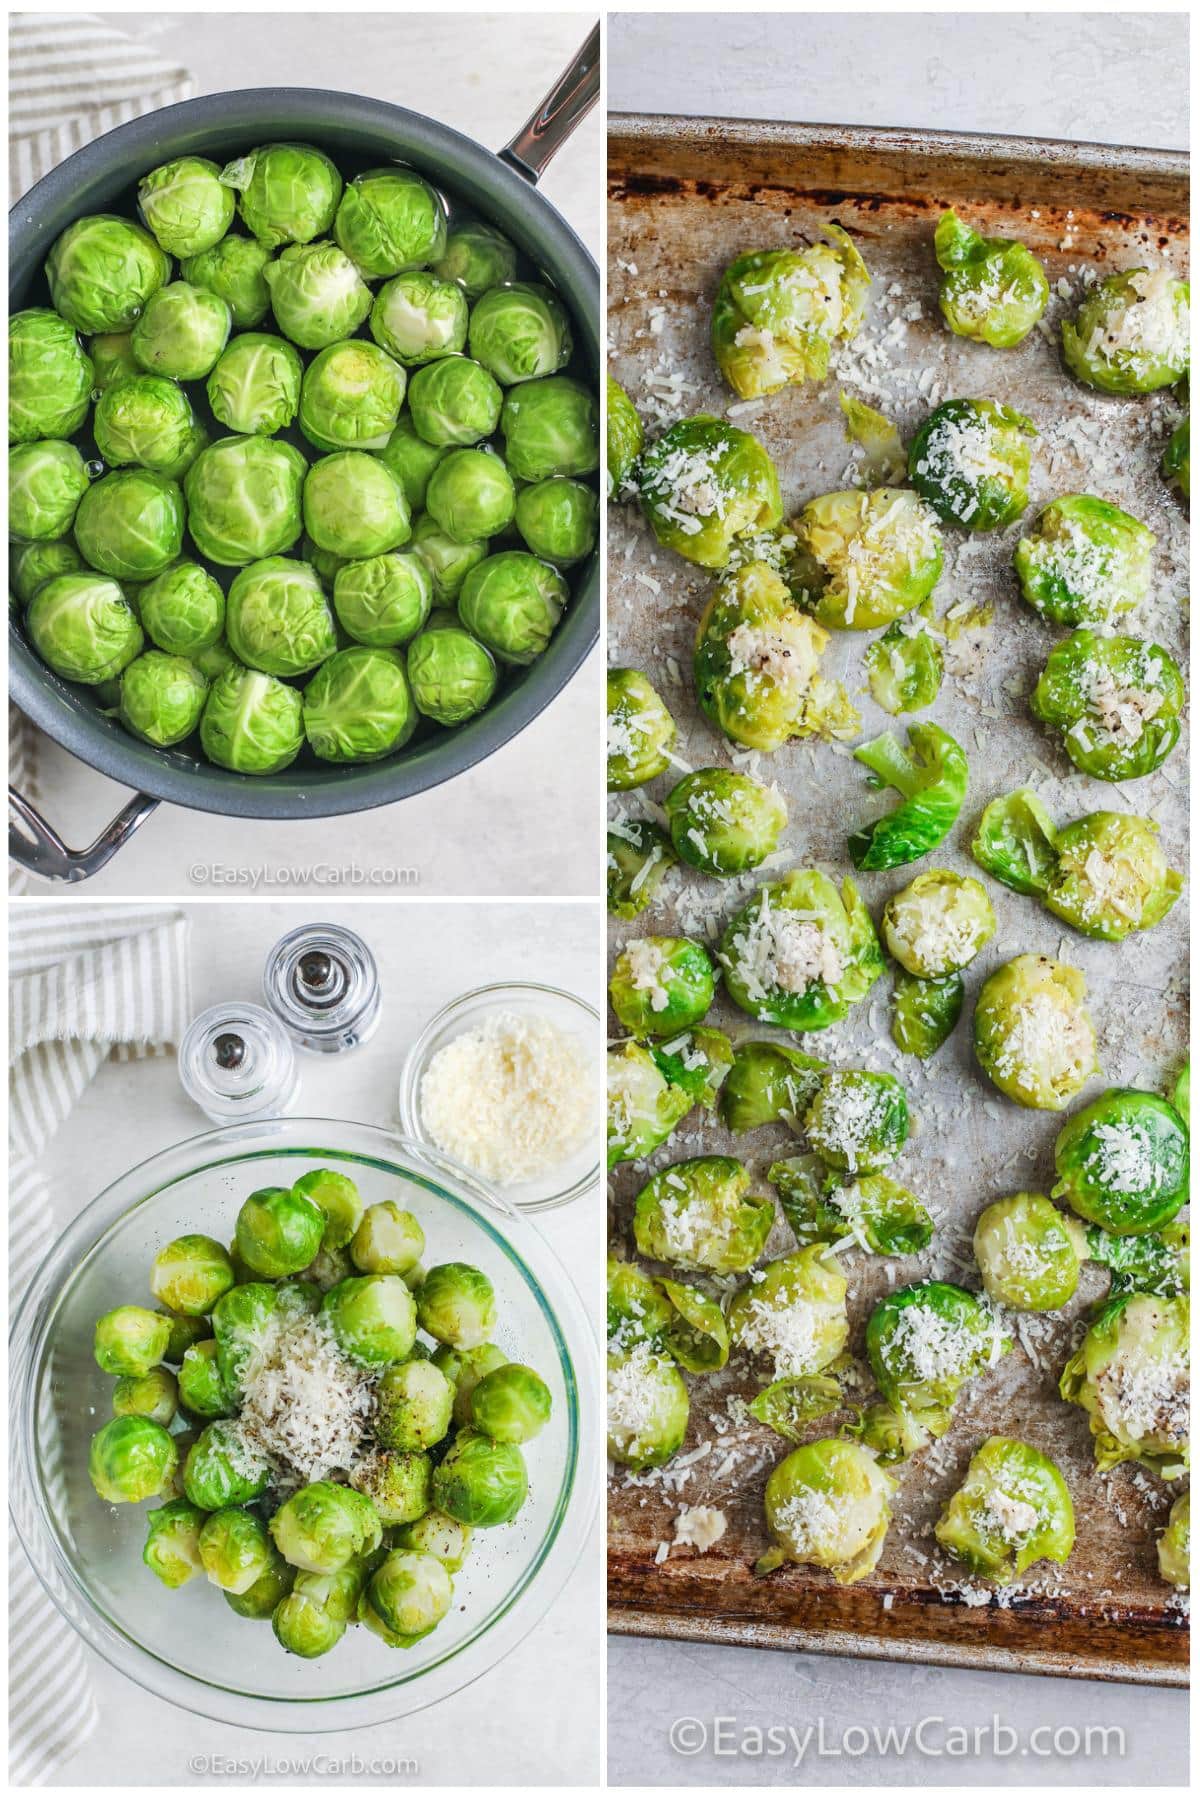 process of adding ingredients to sheet pan to make Smashed Brussels Sprouts